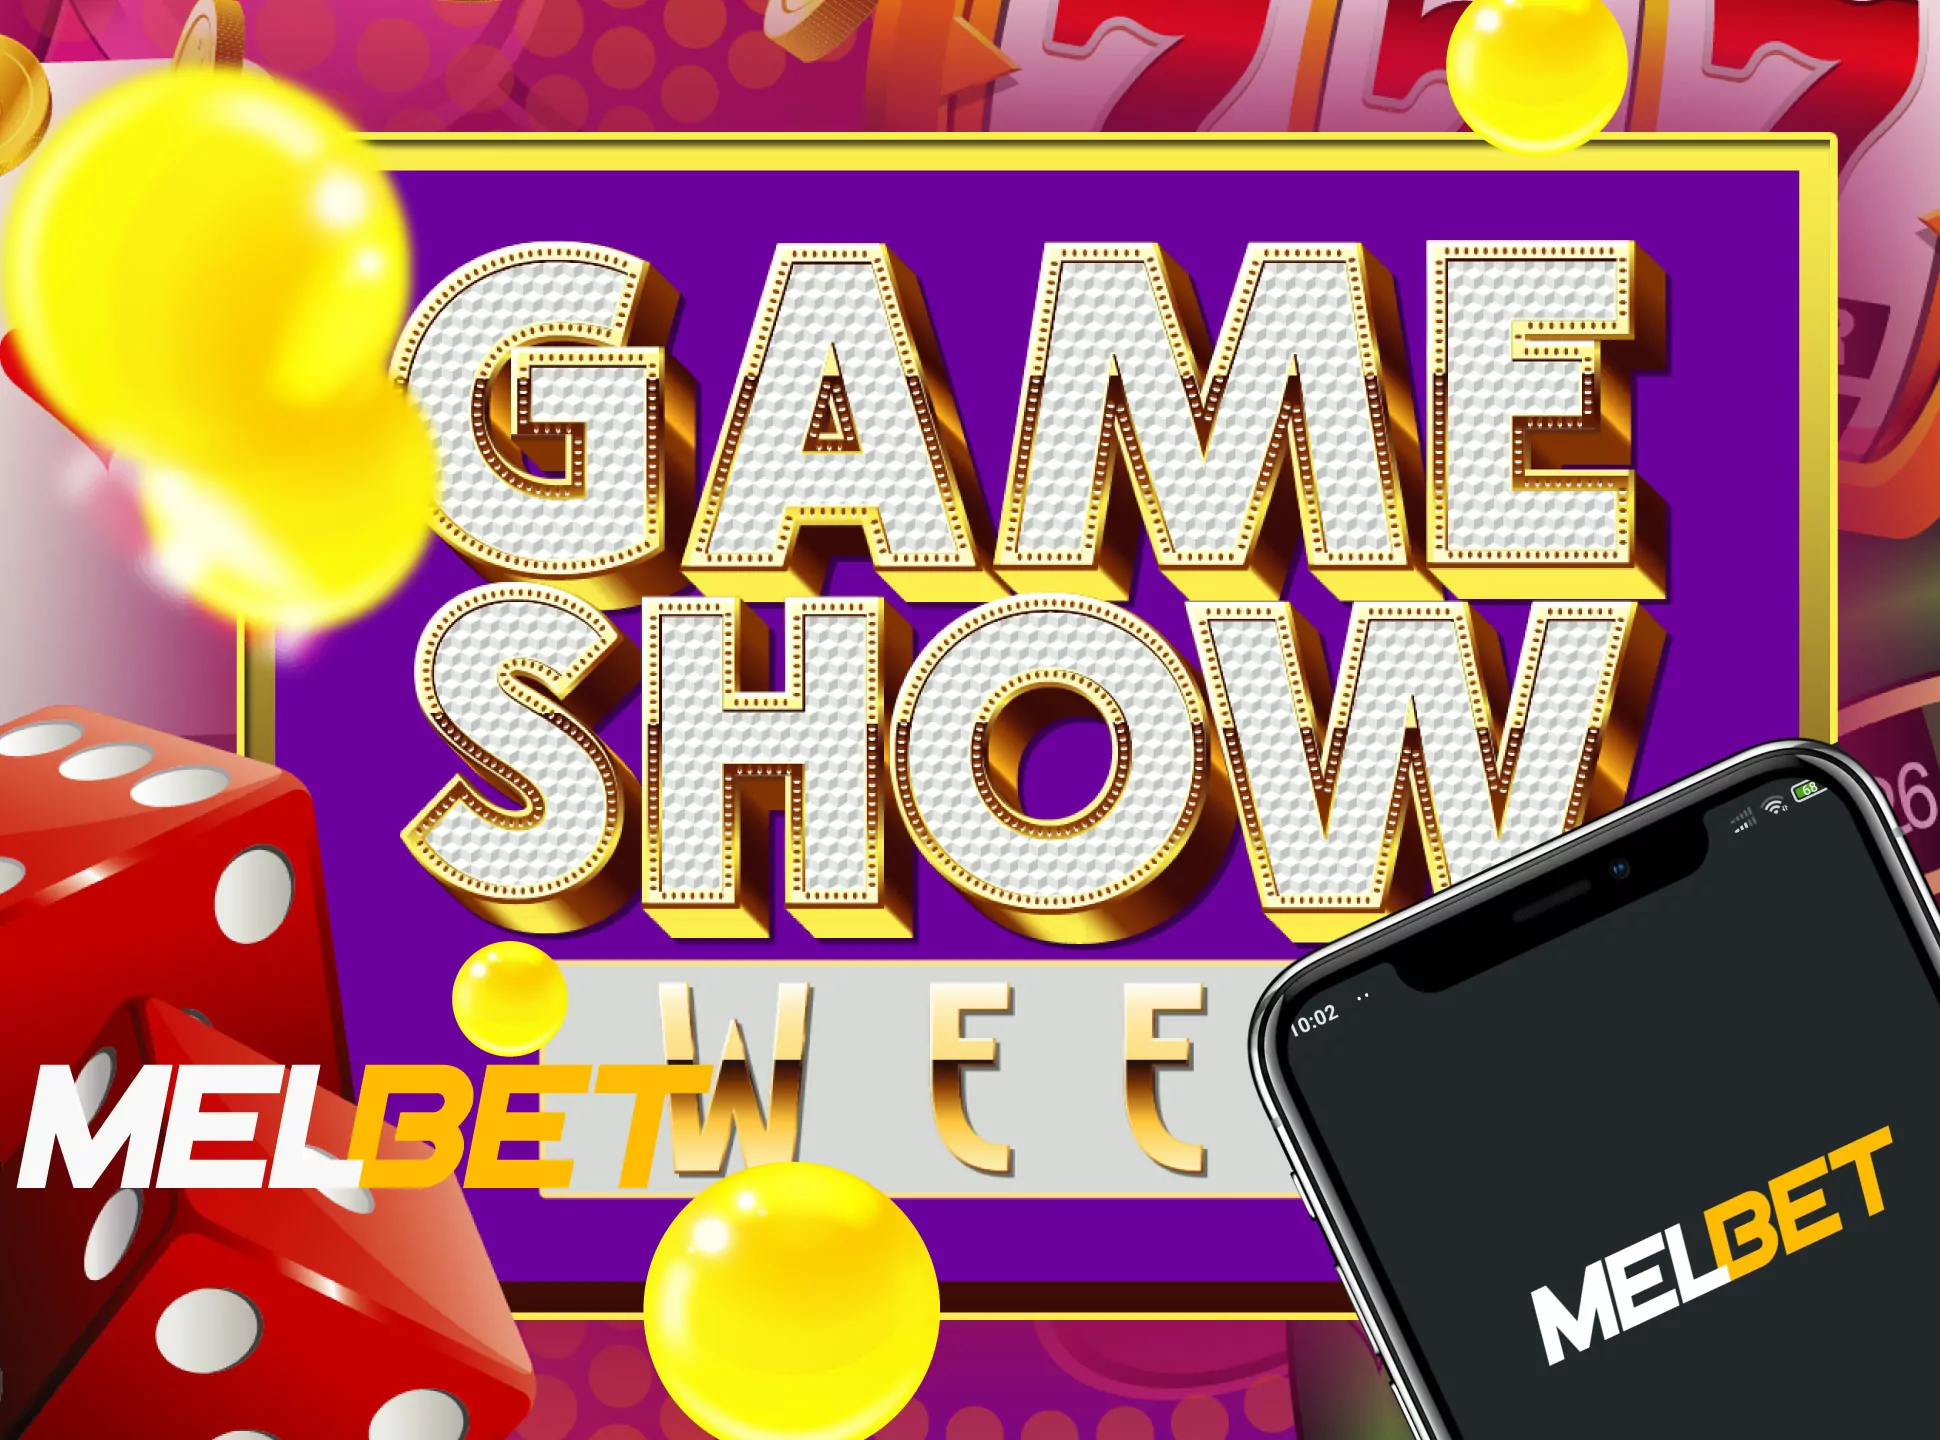 Watch and bet on live game shows.